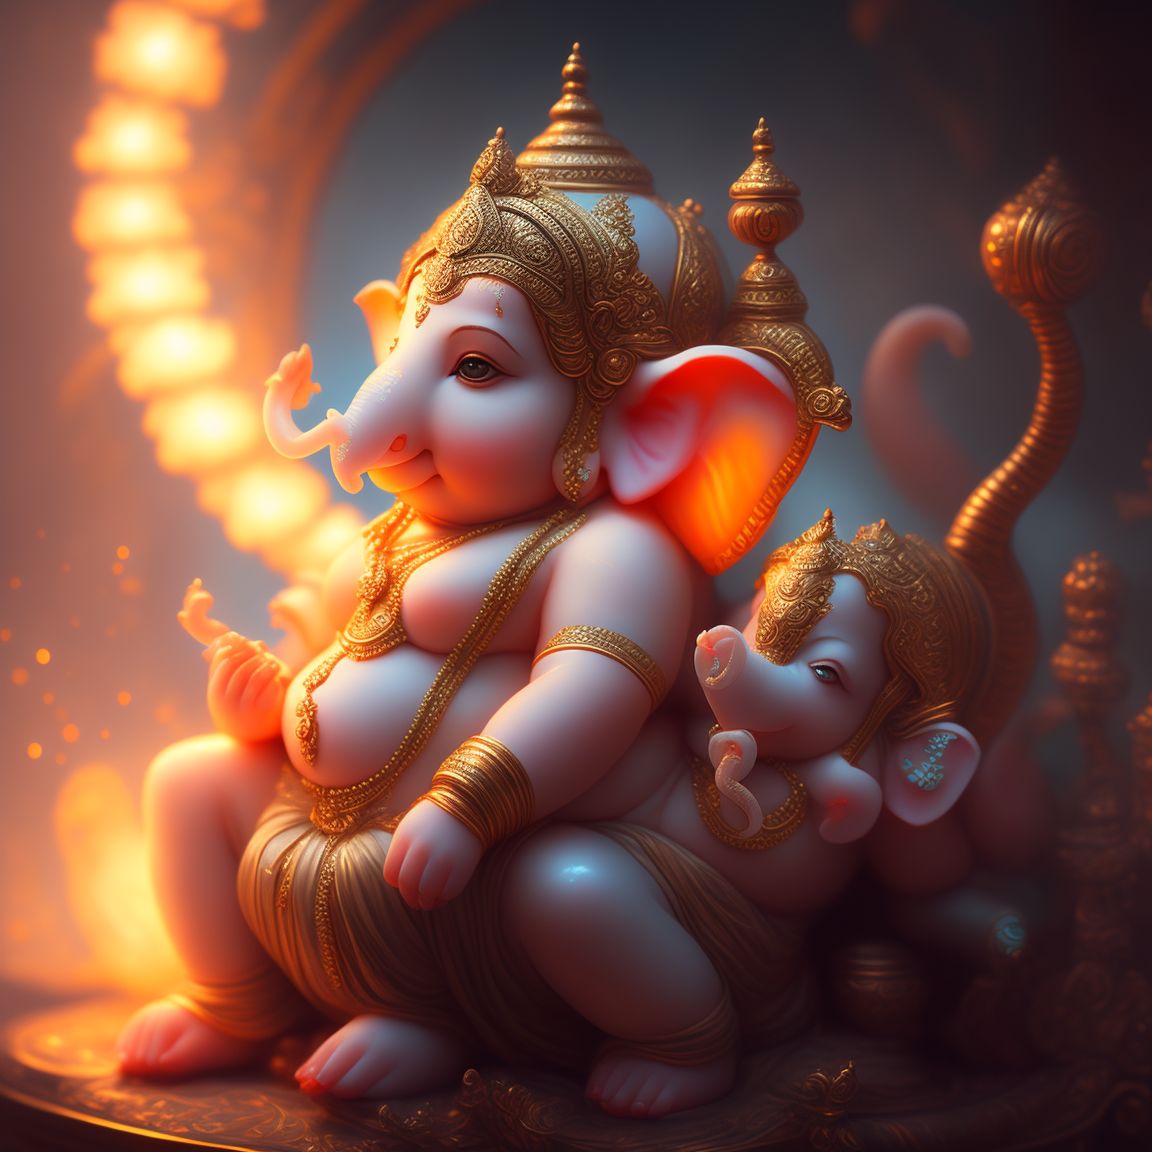 witty-dove466: Baby Lord Ganesh